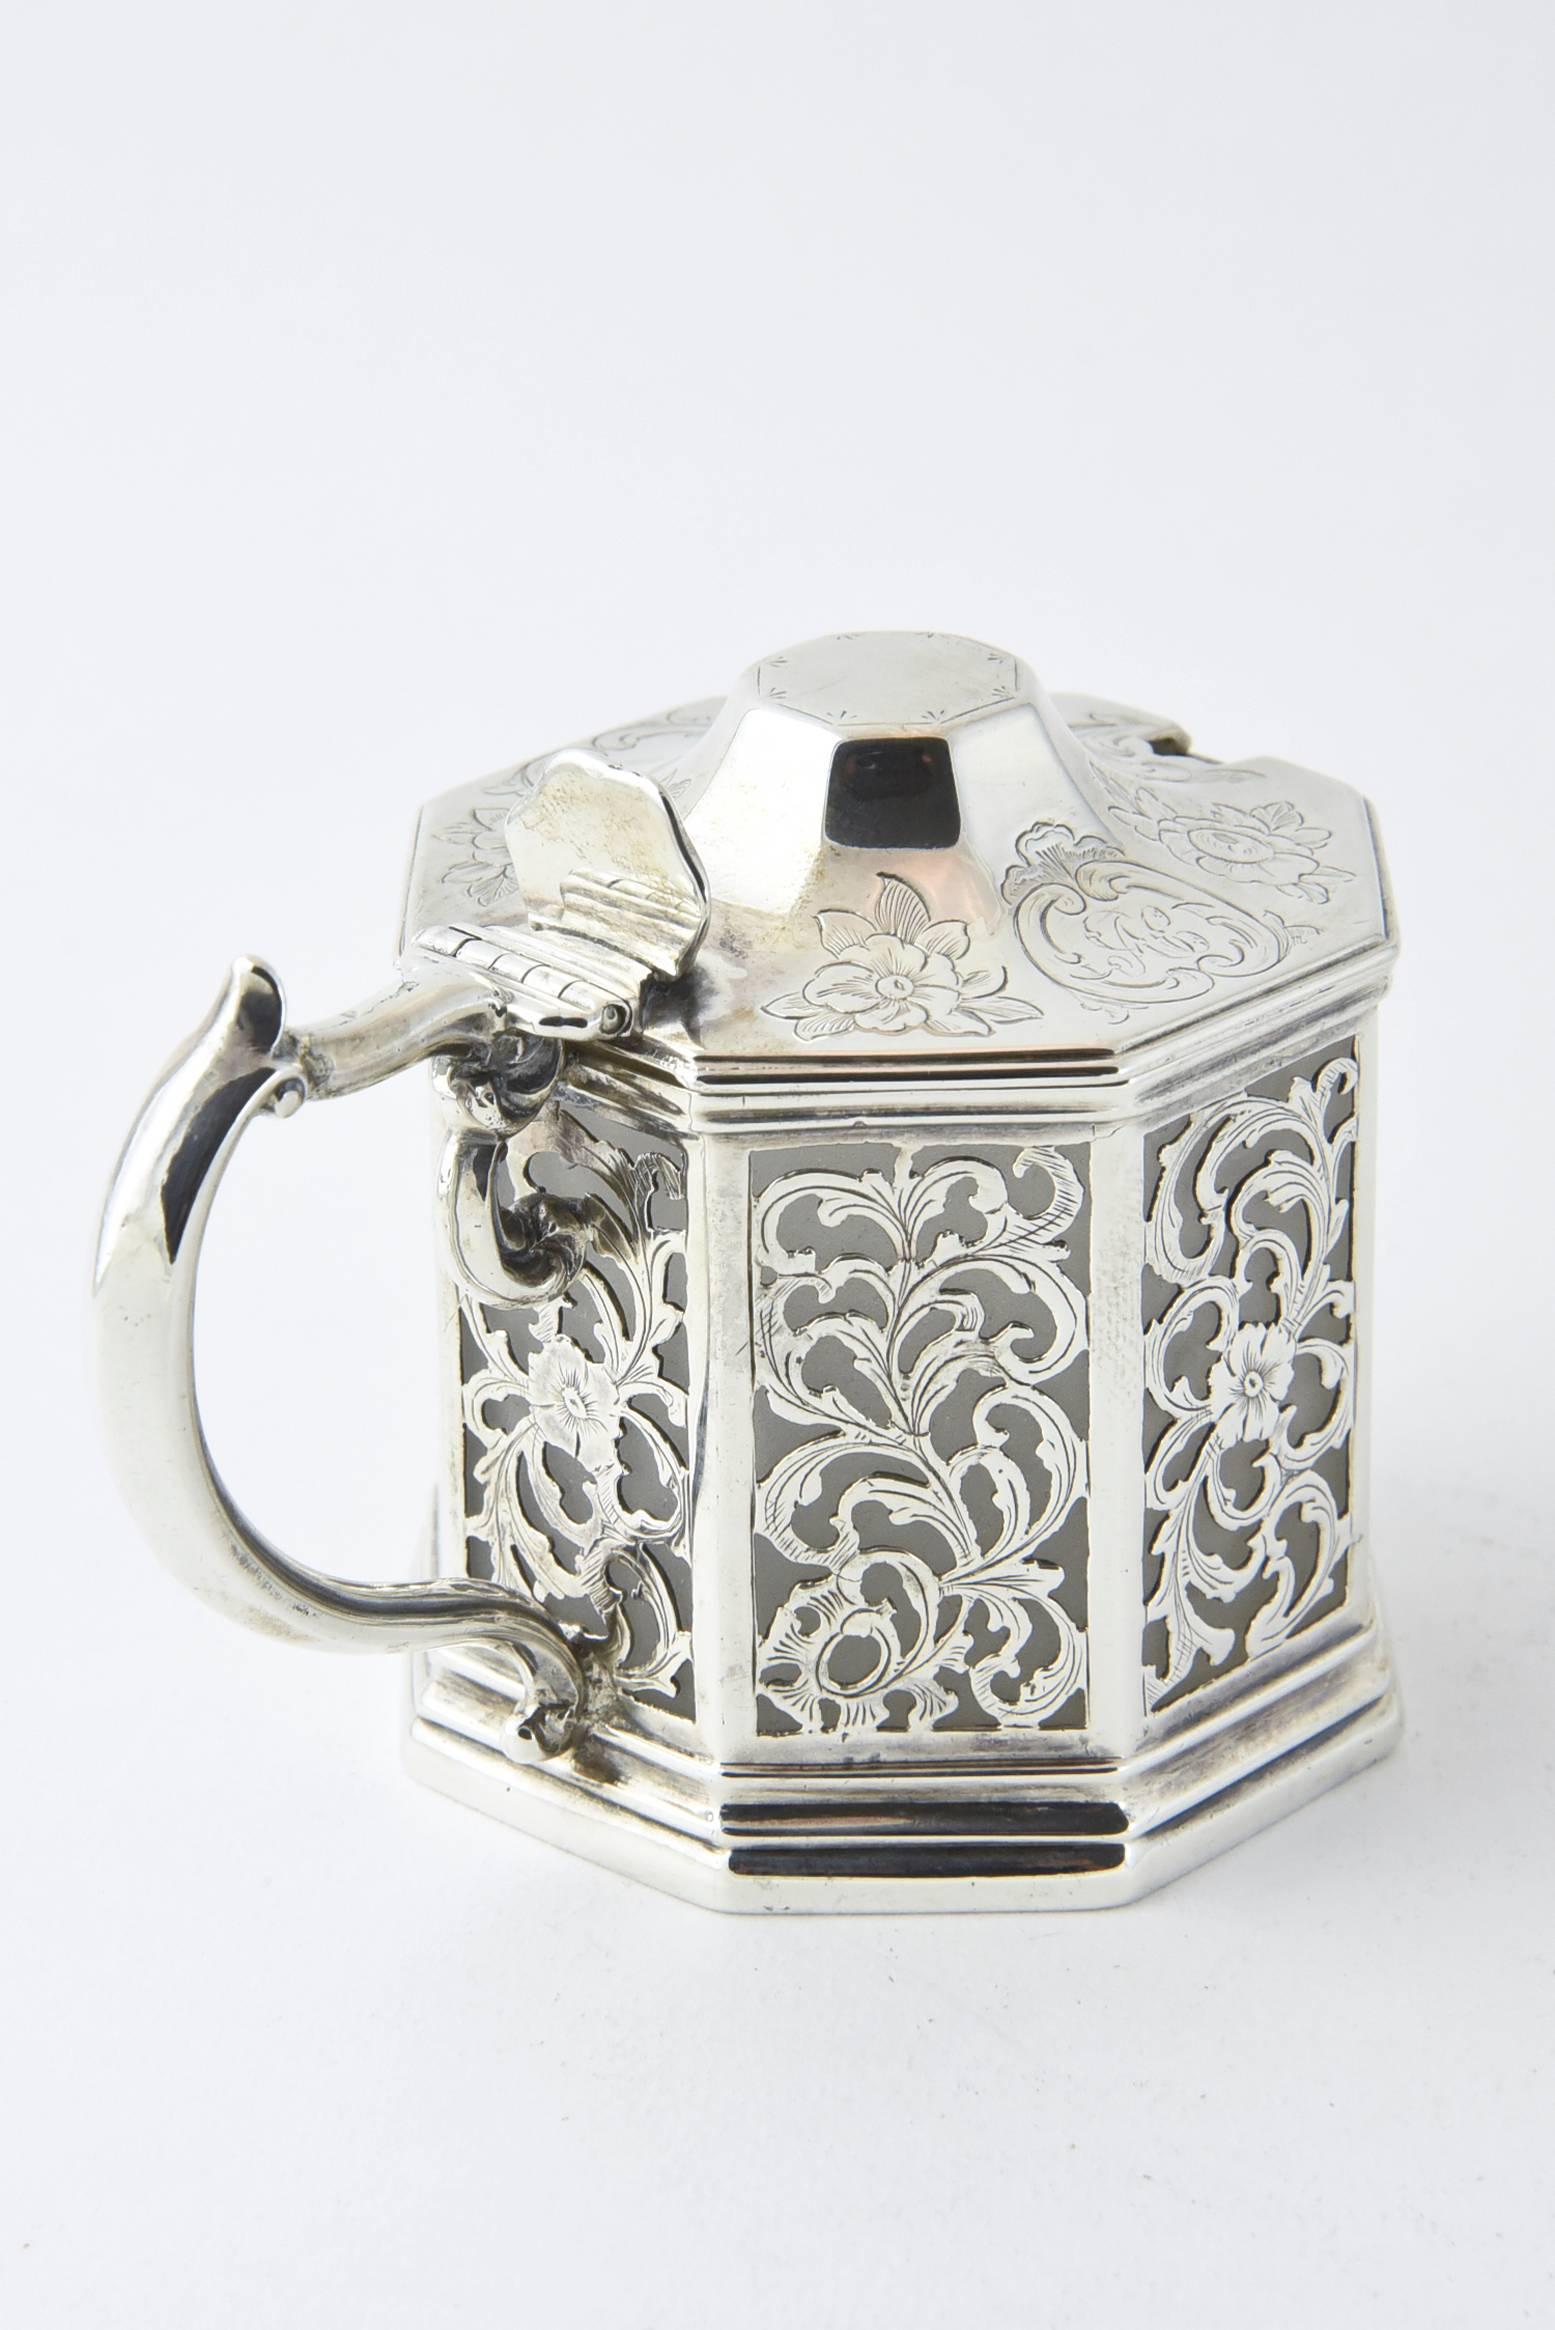 Fine English pierced sterling silver and white glass covered floral mustard pot, London, 1848 makers: John Angell and George Angell. The body is a pierced sterling floral design and the top is engraved with a similar design. The lid has a figural